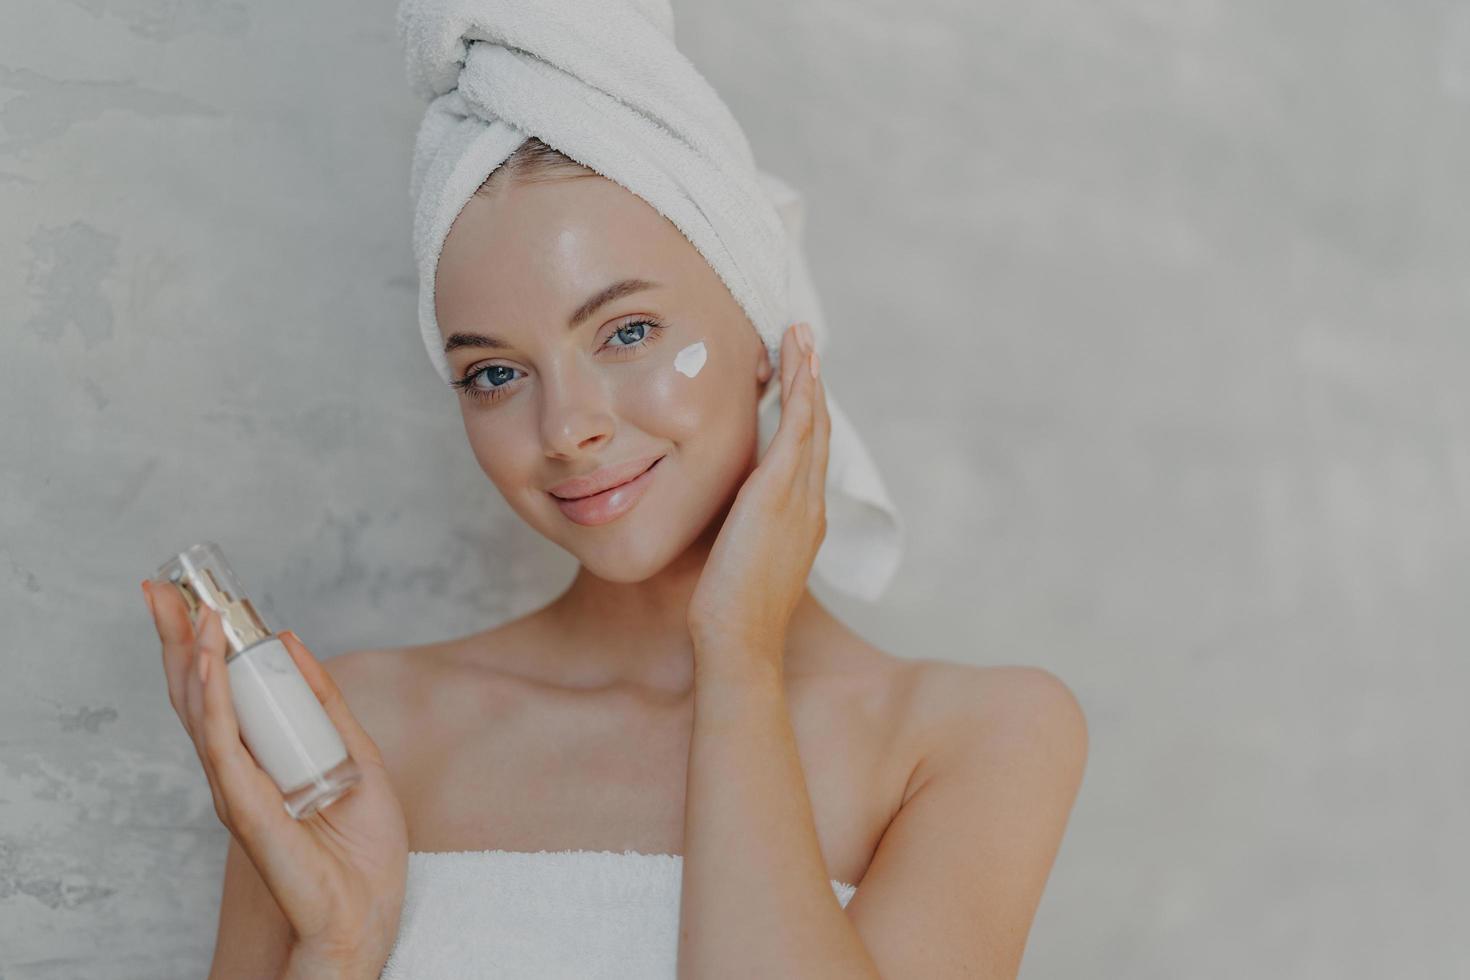 https://static.vecteezy.com/system/resources/previews/011/315/459/non_2x/beautiful-tender-smiling-woman-applies-face-cream-takes-care-of-her-beauty-has-natural-makeup-clean-perfect-skin-wrapped-in-bath-towel-poses-against-grey-background-beauty-treatments-concept-free-photo.JPG